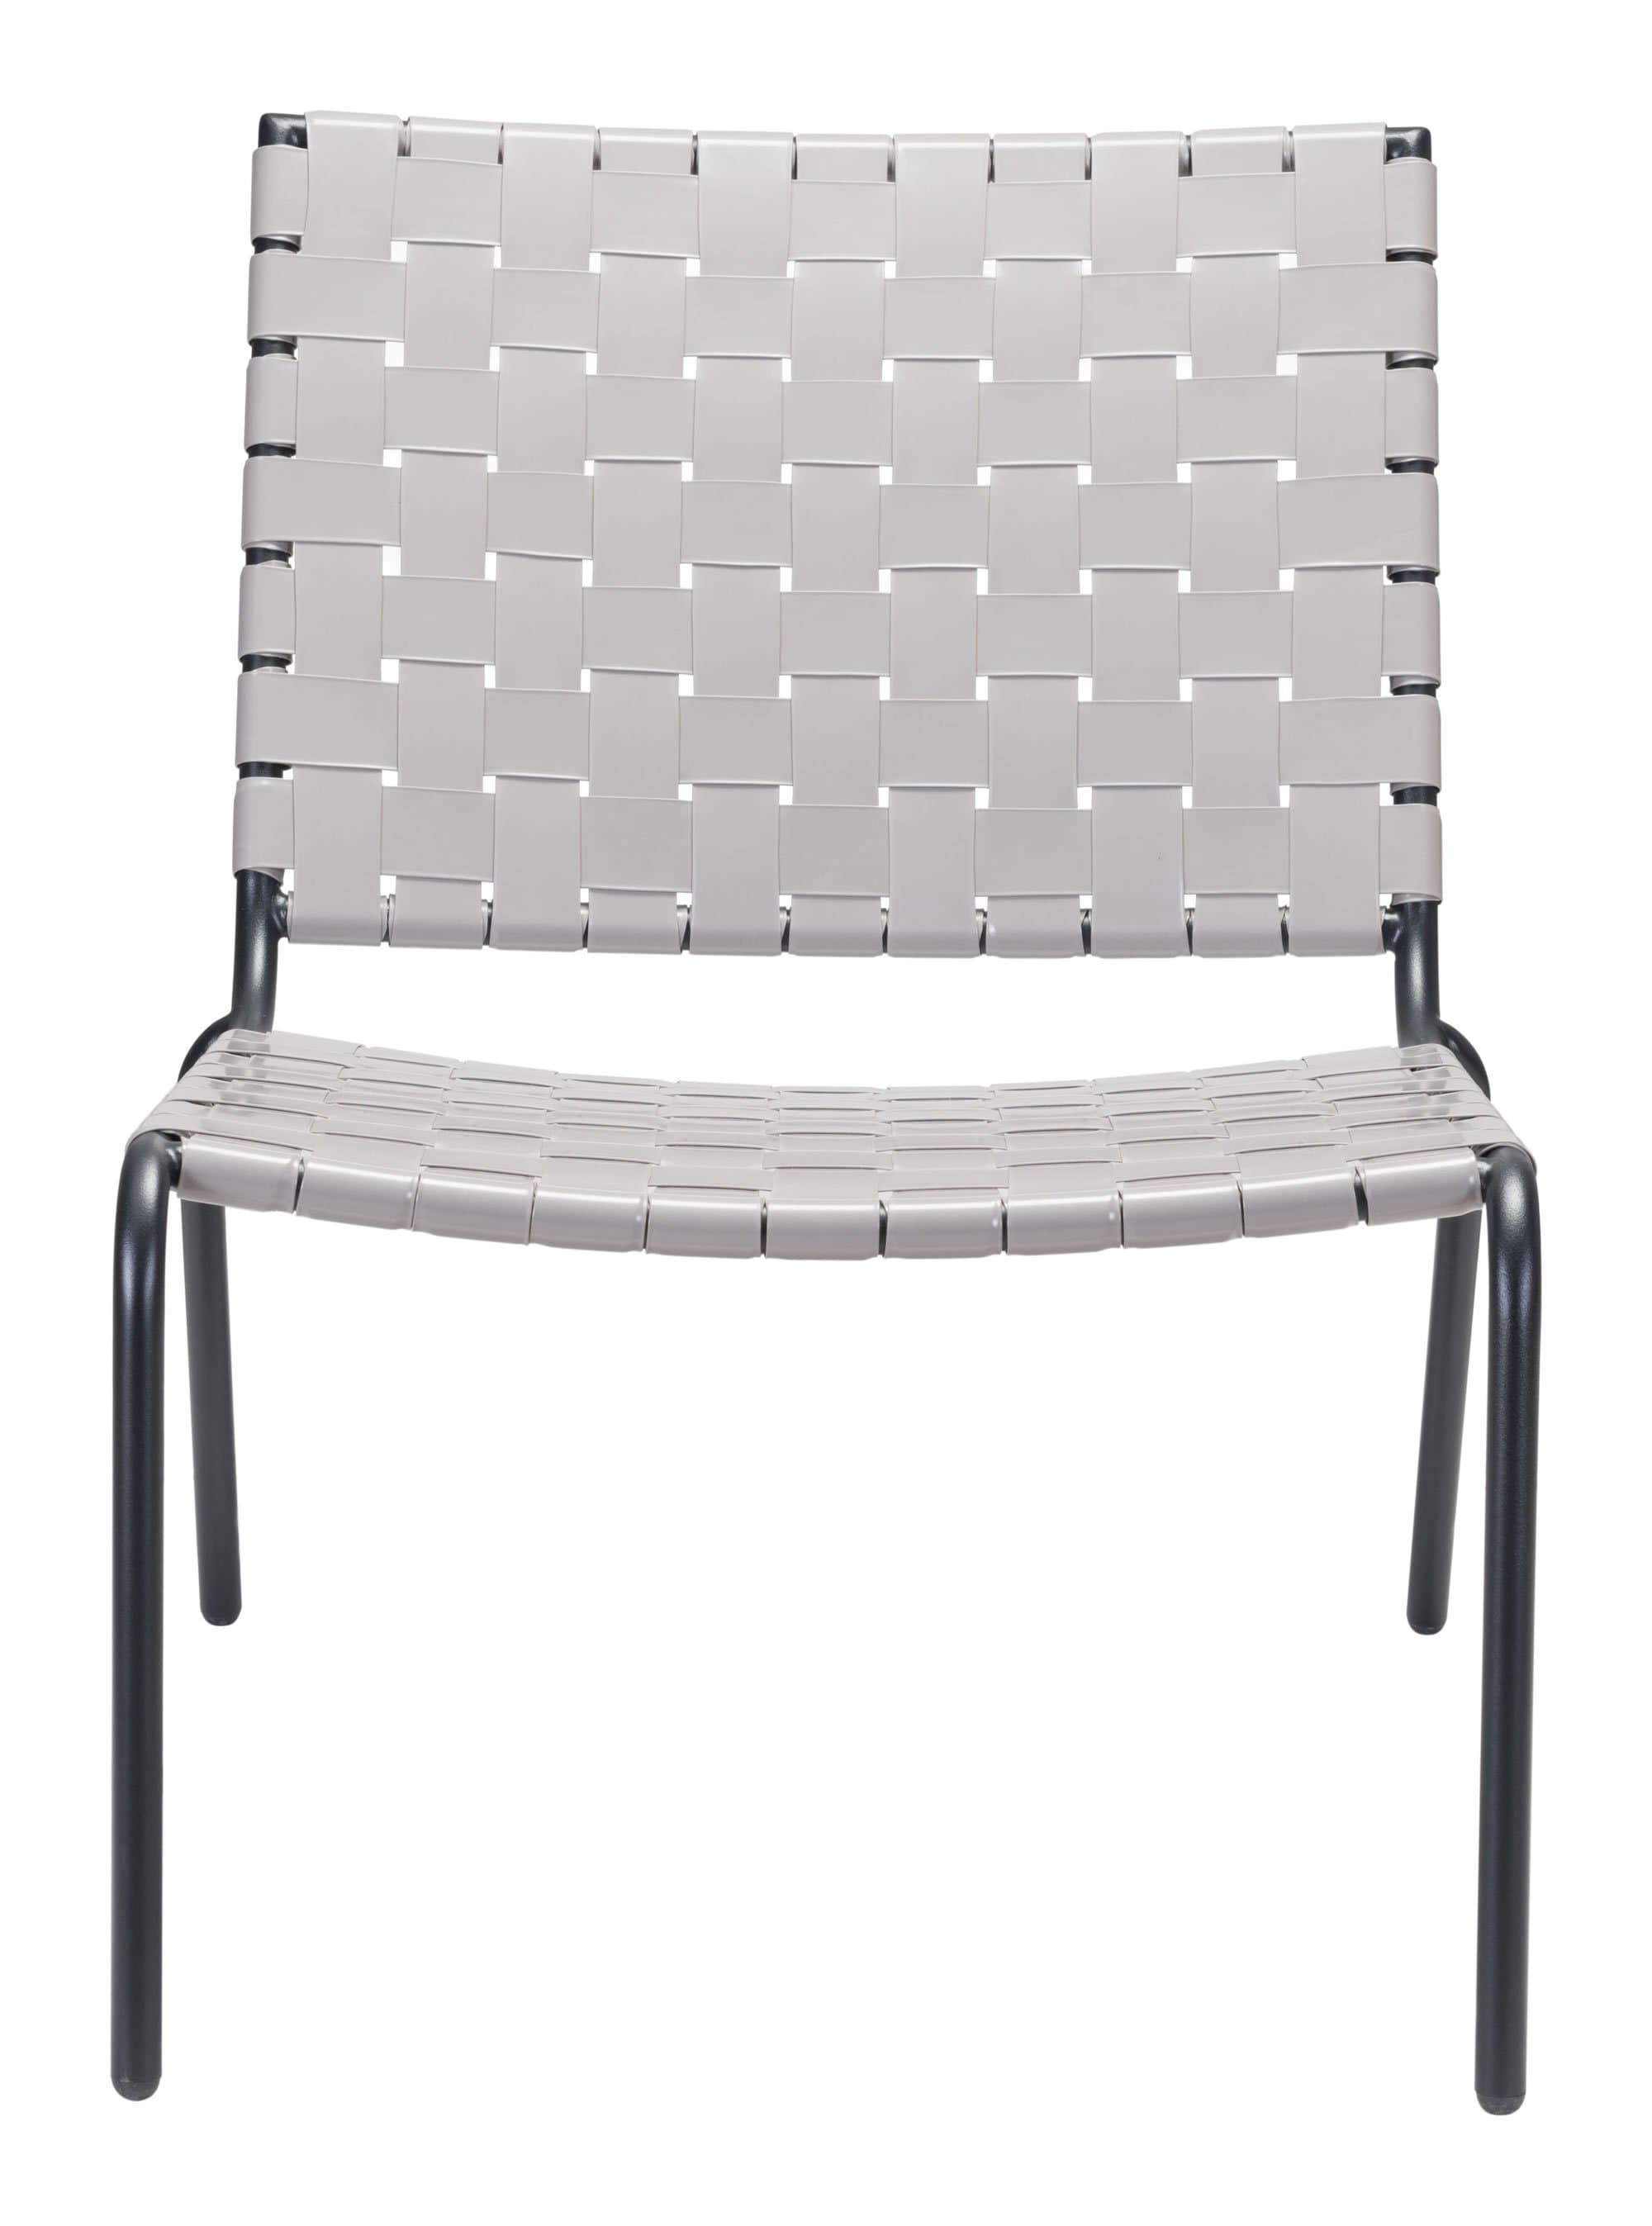 HomeRoots Outdoors Outdoor Chairs Light Gray / PVC, Steel 26.4" x 35.8" x 31.5" Light Gray, PVC, Steel, Lounge Chair